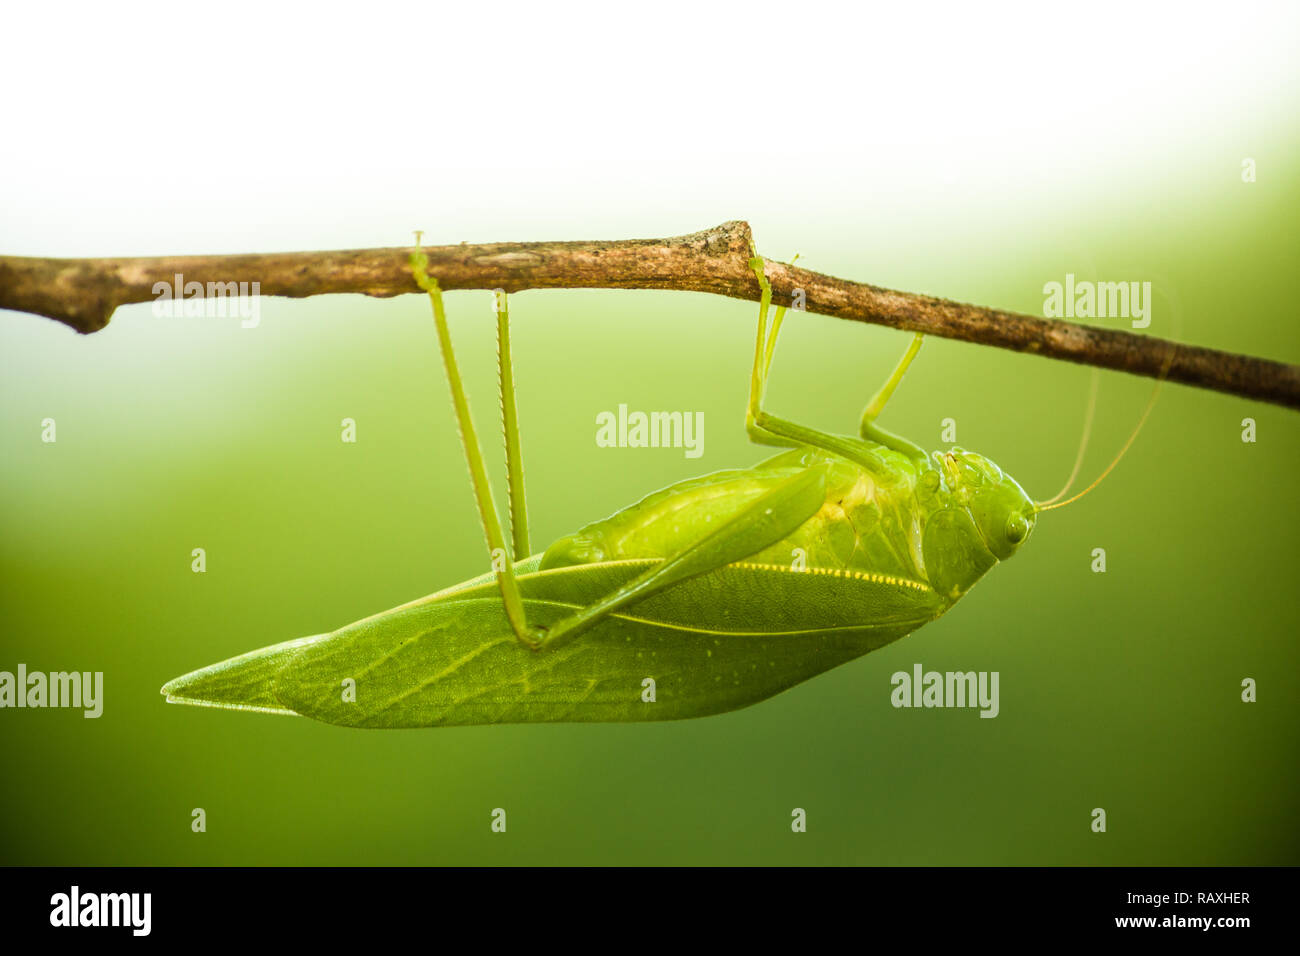 Green bush cricket, katydid or long-horned grasshopper (insect family Tettigoniidae) attached to a tree branch wooden stick macro closeup photo with l Stock Photo